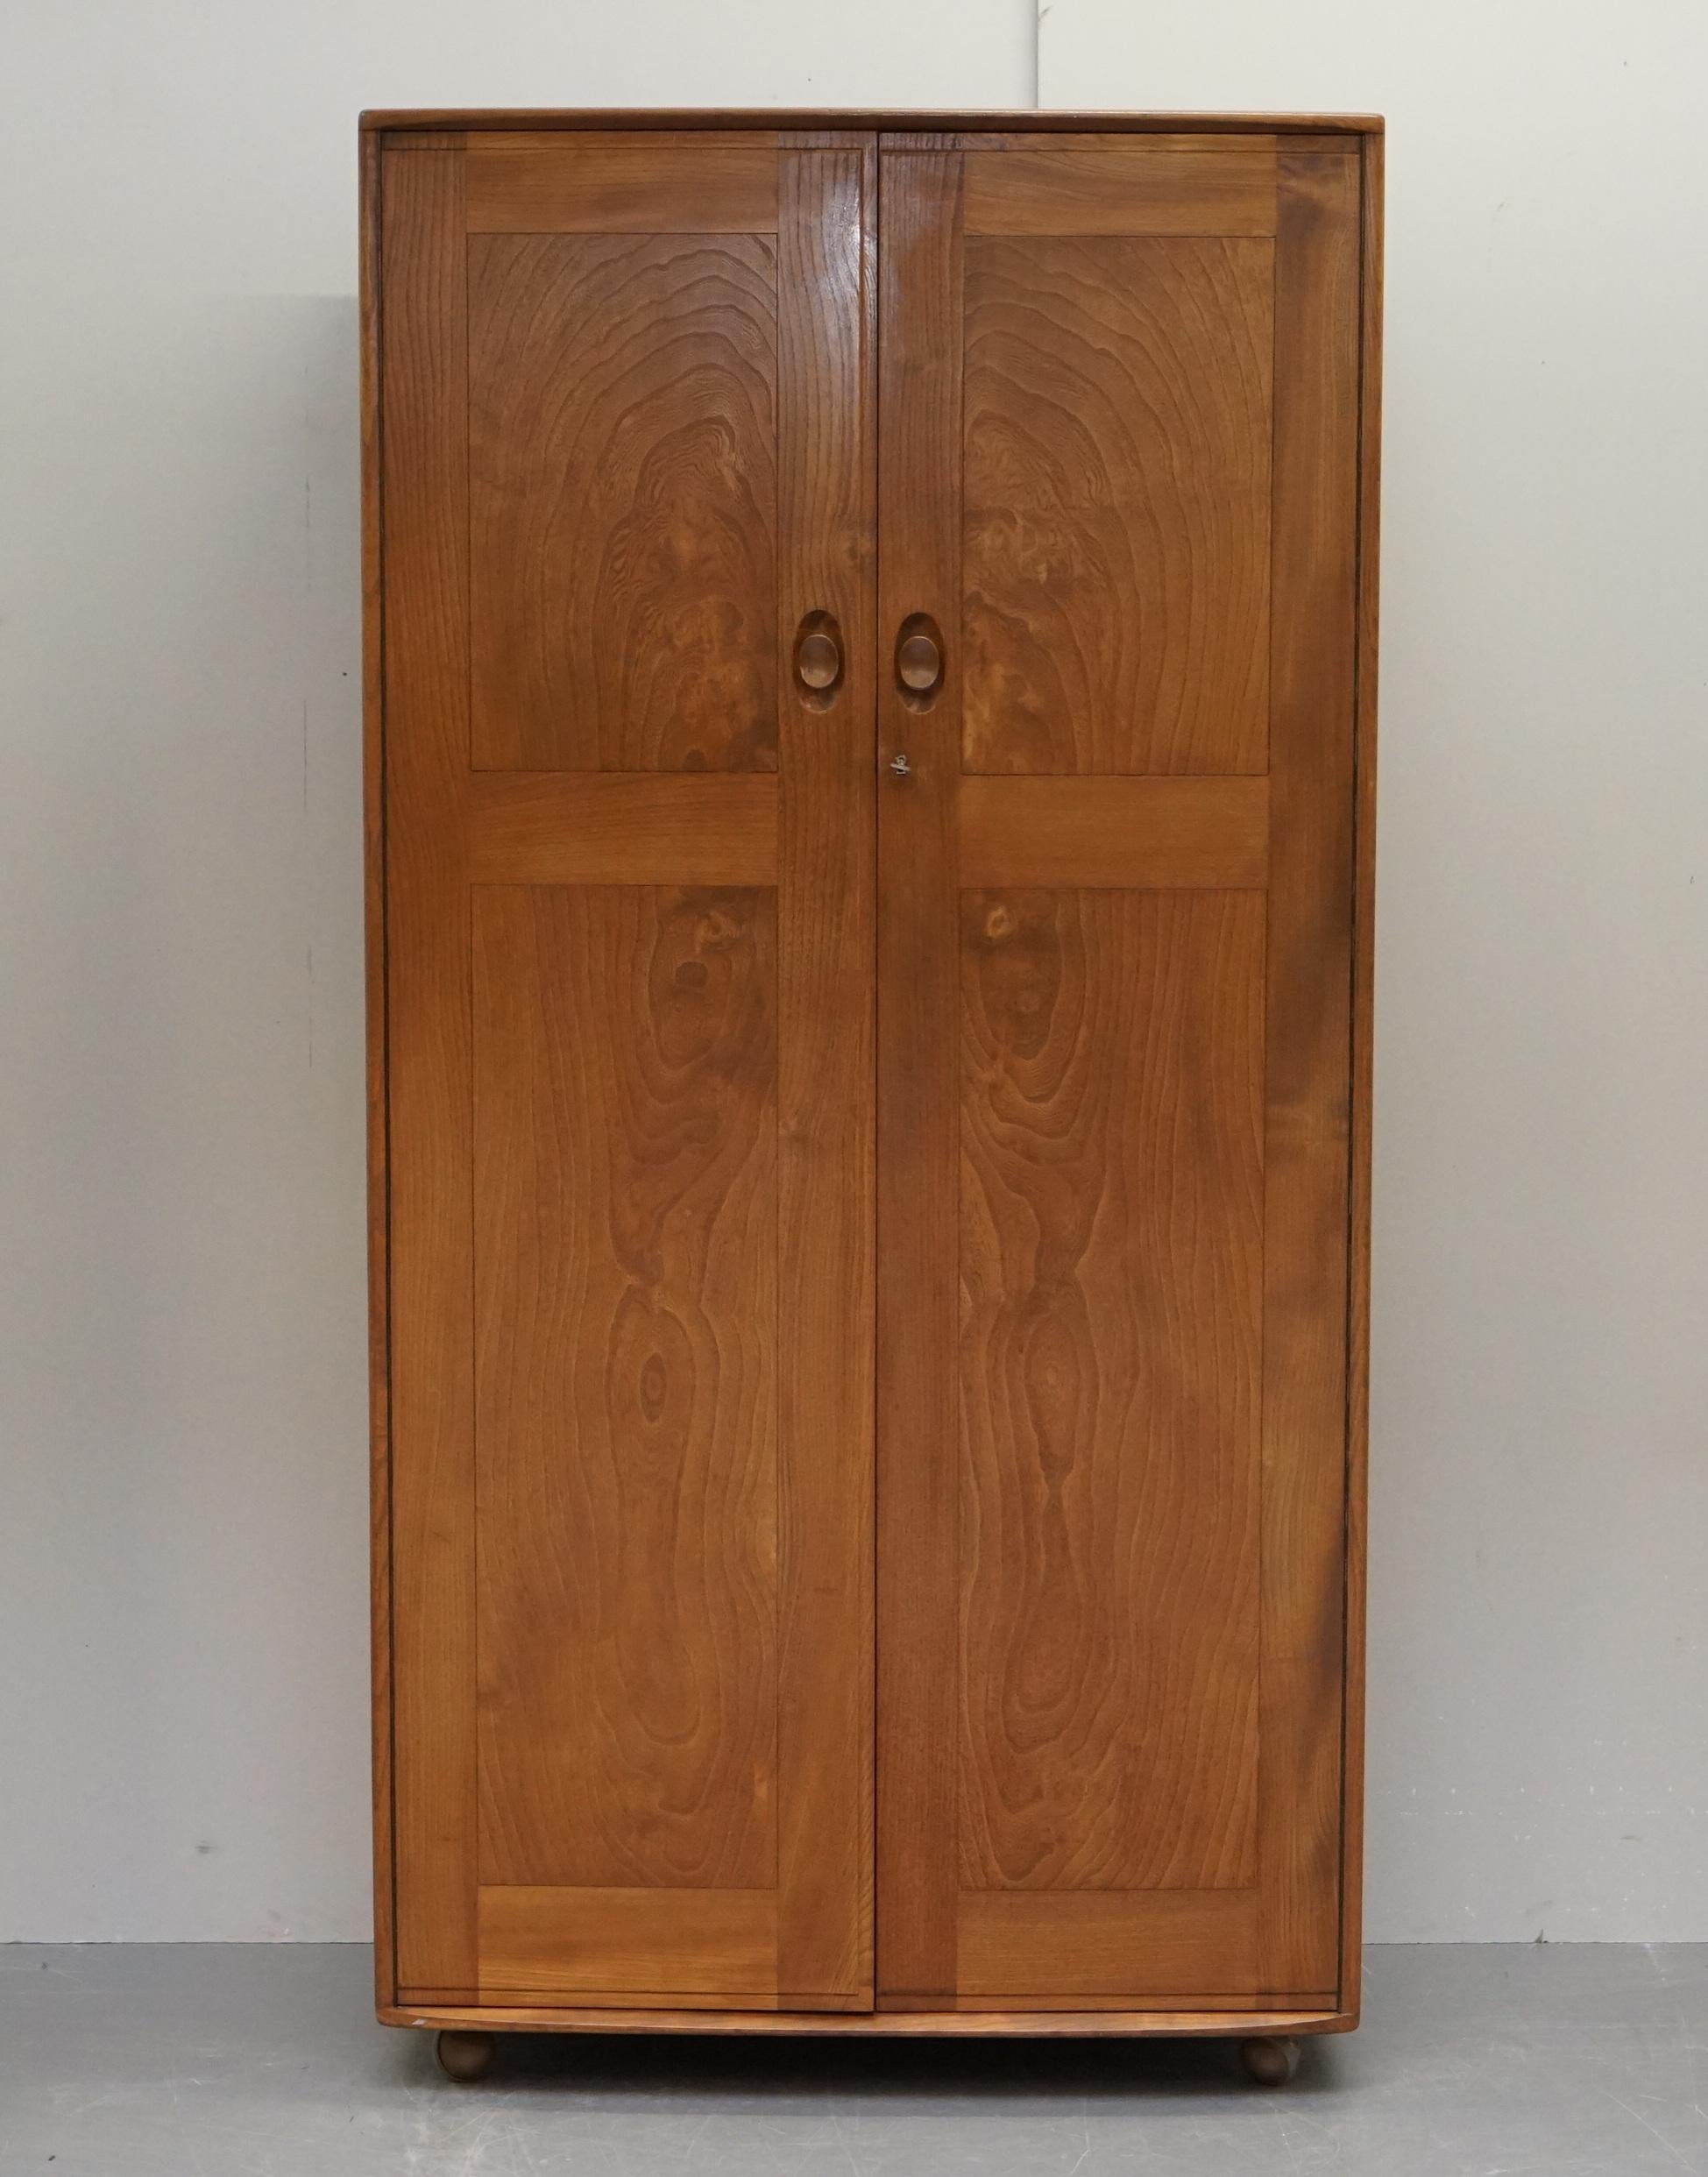 We are delighted to offer for sale this stunning original circa 1960s G-Plan Ercol solid Elm wardrobe which is part of a large suite

This piece is in perfect and I mean absolutely perfect condition, you will be hard pressed to find a single sign